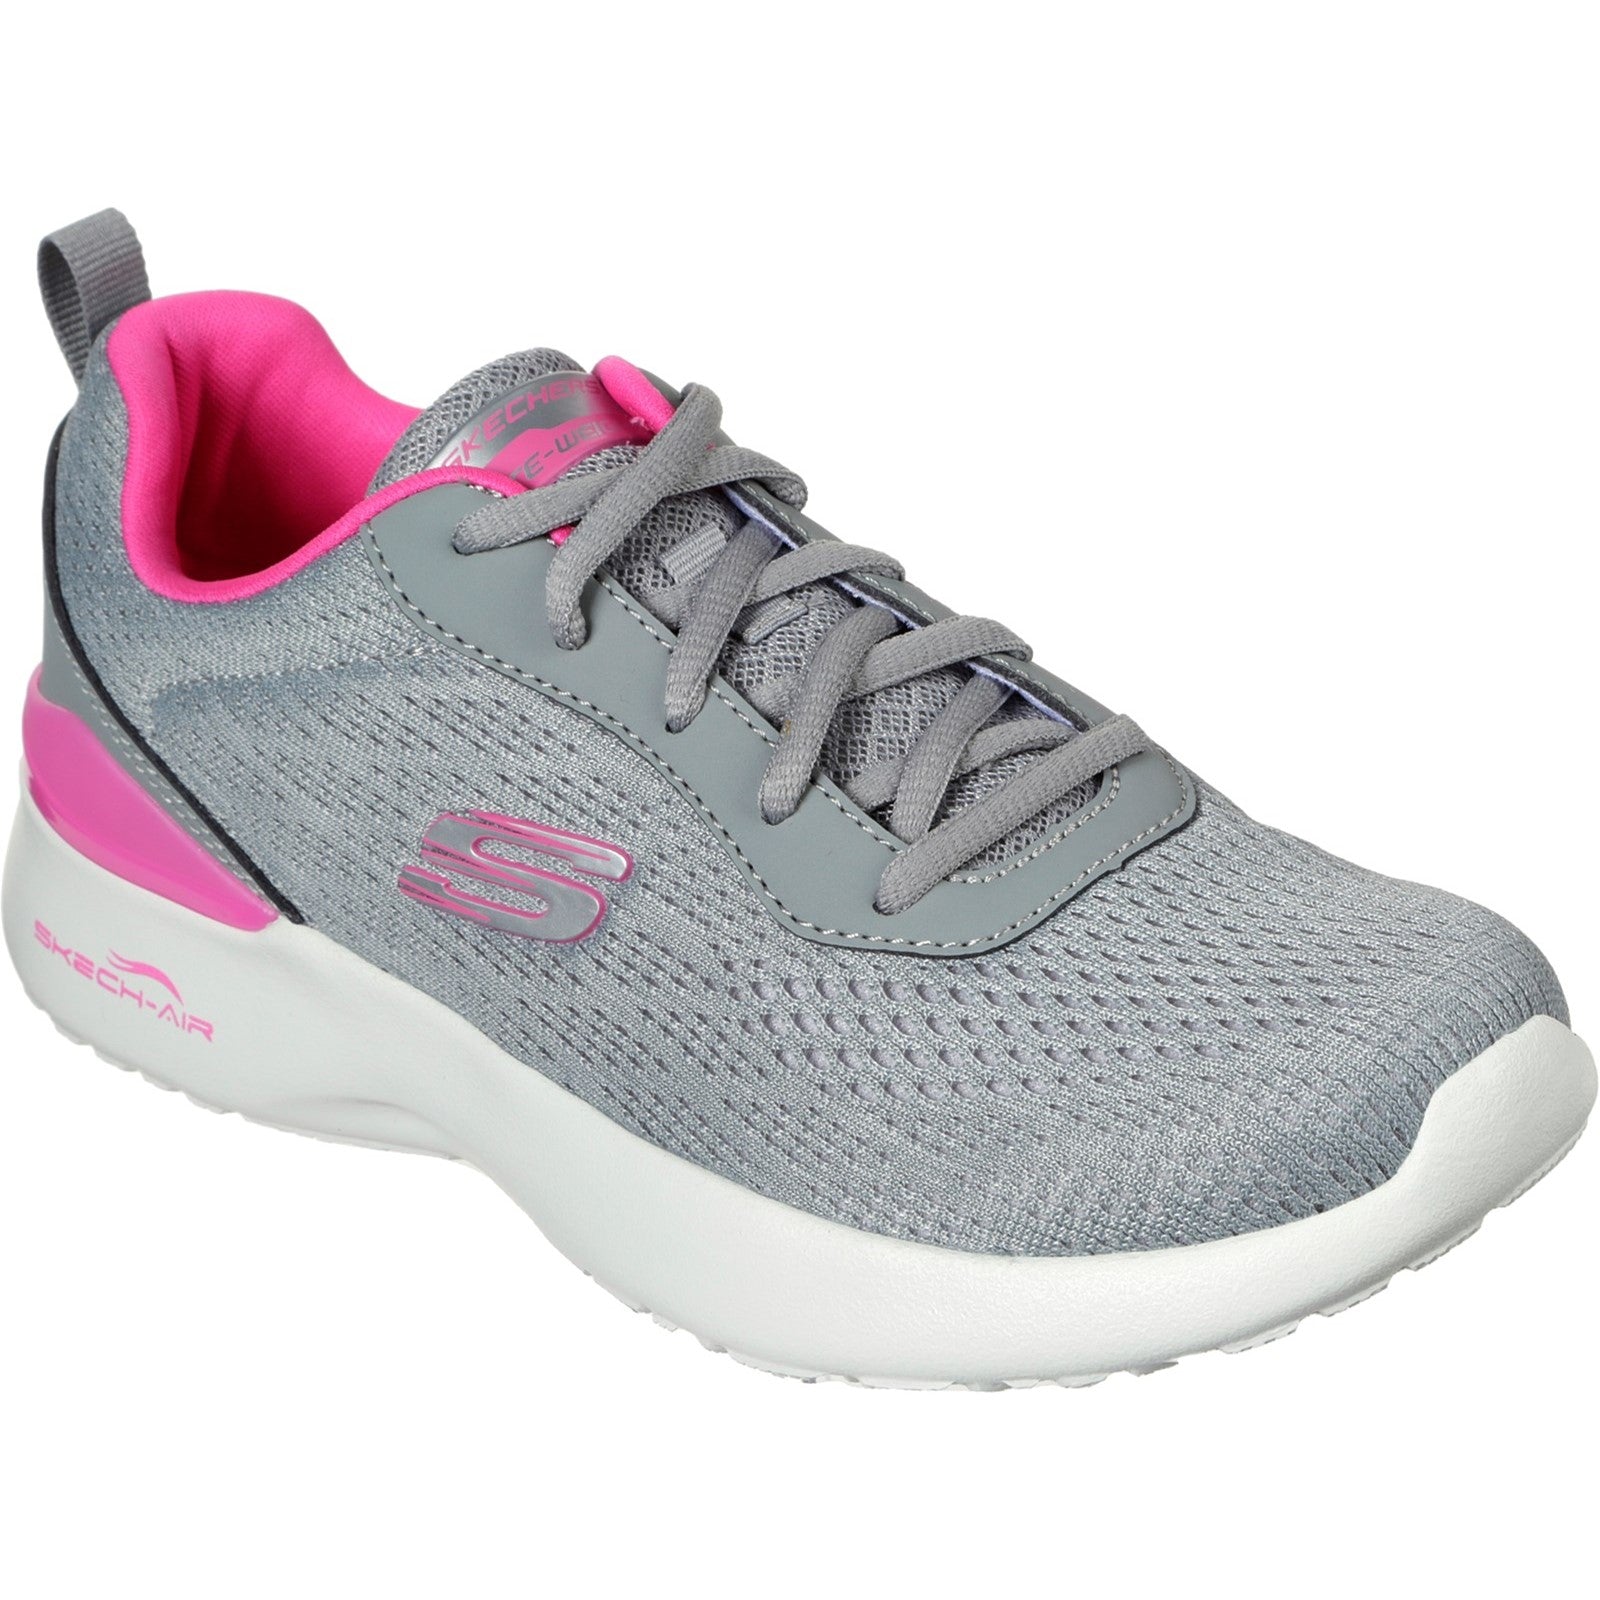 Skechers Skech-Air Dynamight Top Prize Trainer